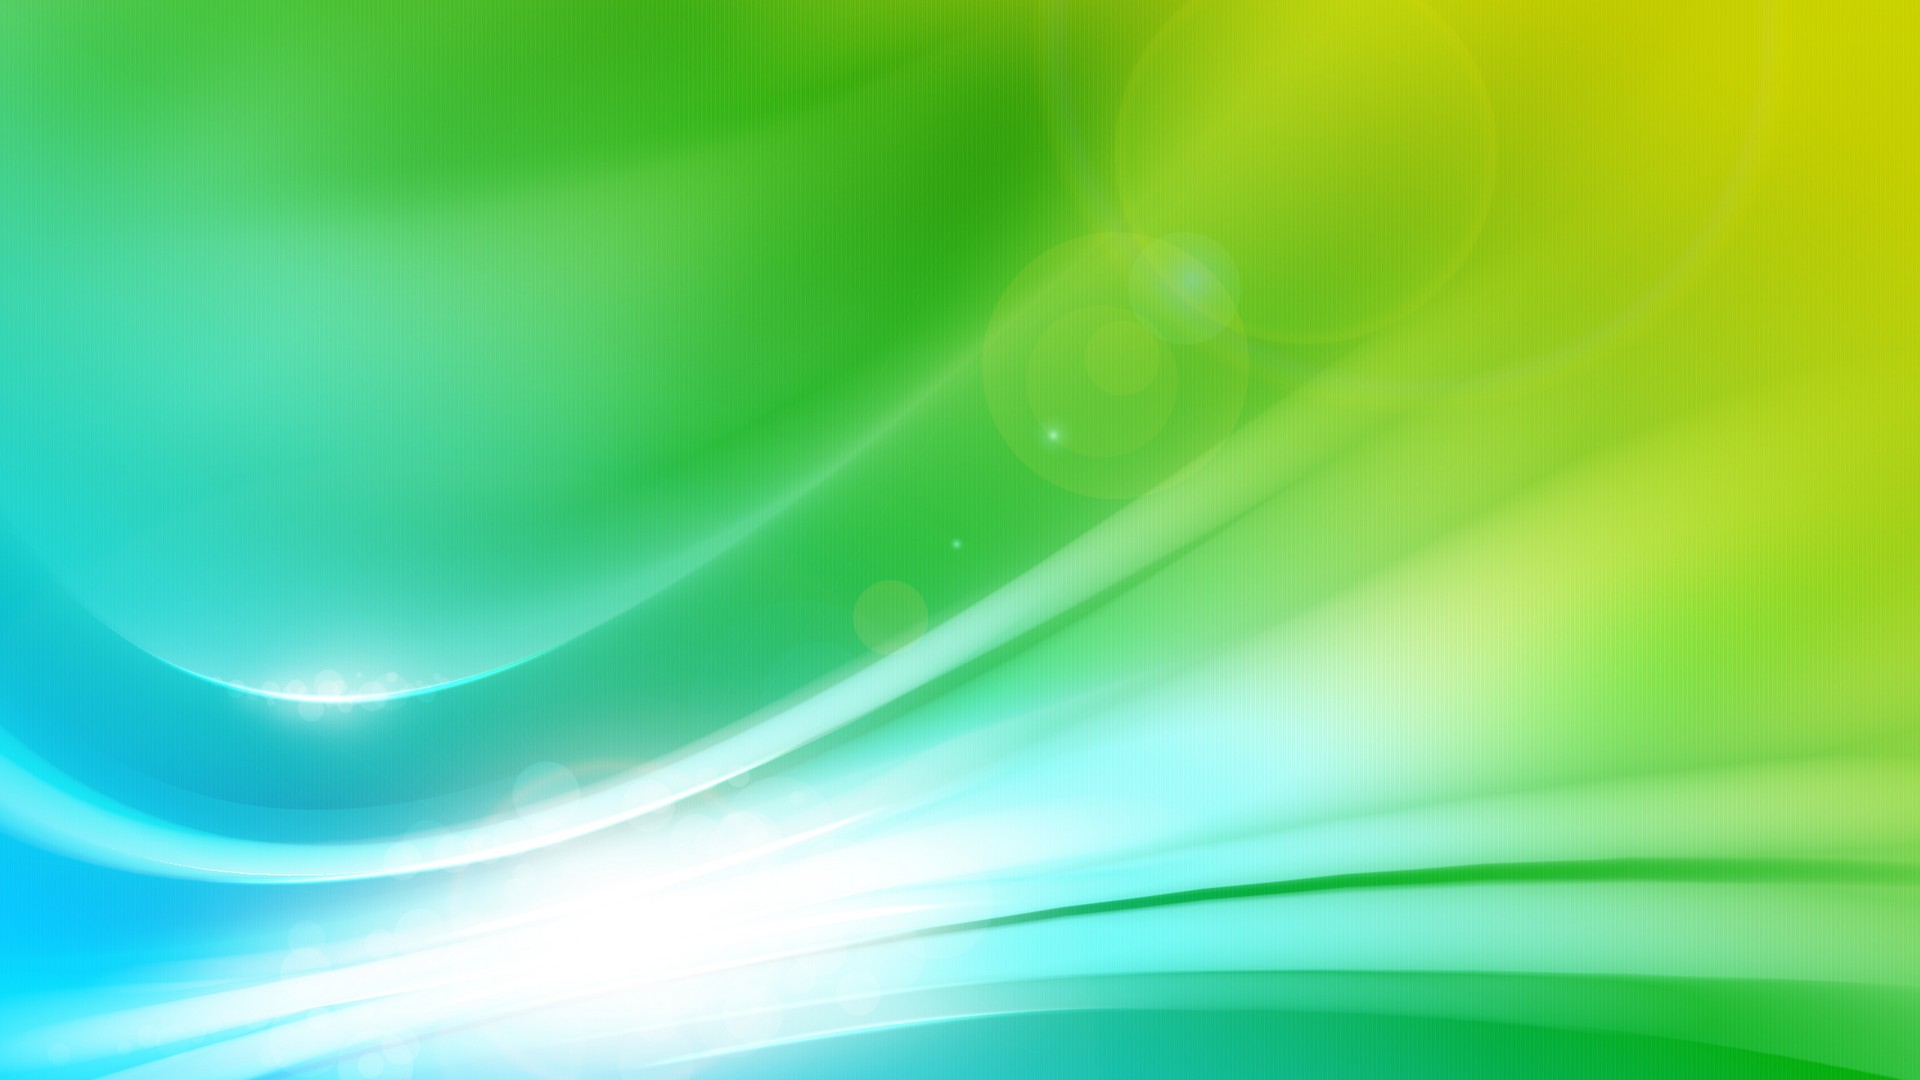 Light Green Desktop Backgrounds HD with image resolution 1920x1080 pixel. You can use this wallpaper as background for your desktop Computer Screensavers, Android or iPhone smartphones